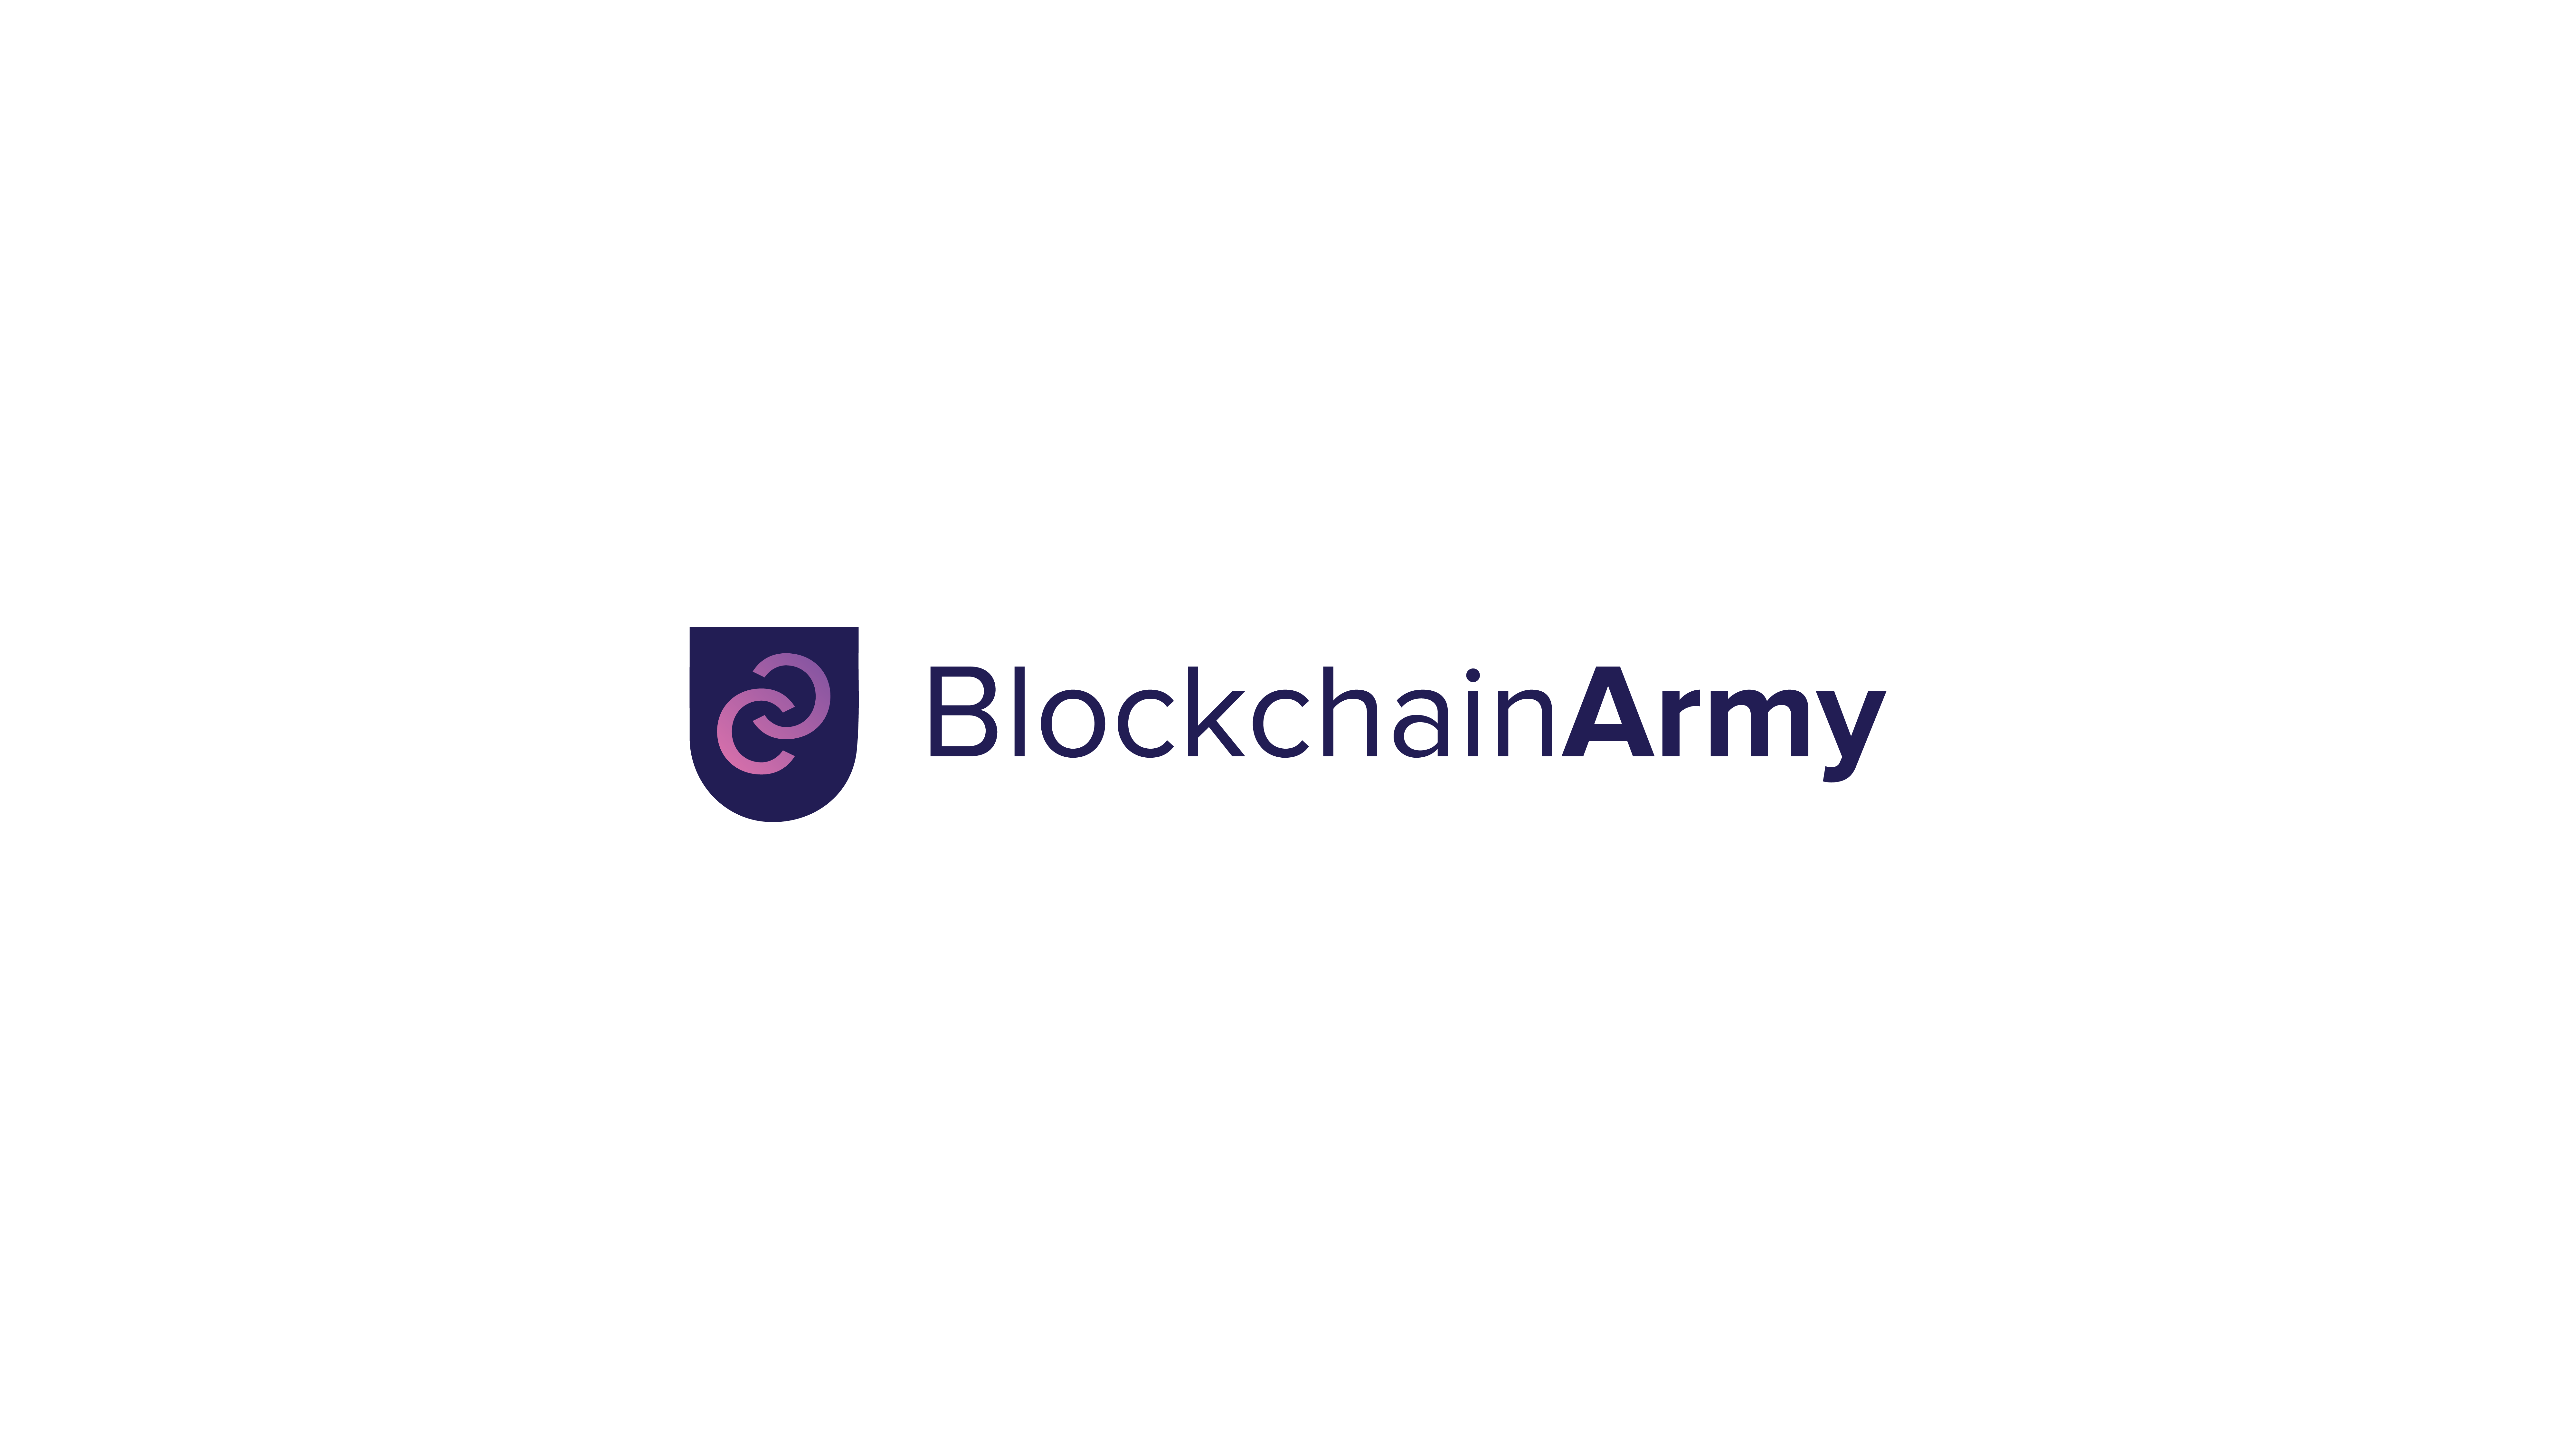 BLOCKCHAINARMY FOUNDER PRESIDENT INVITES GOVERNMENTS FOR A COOPERATION ON PANDEMIC